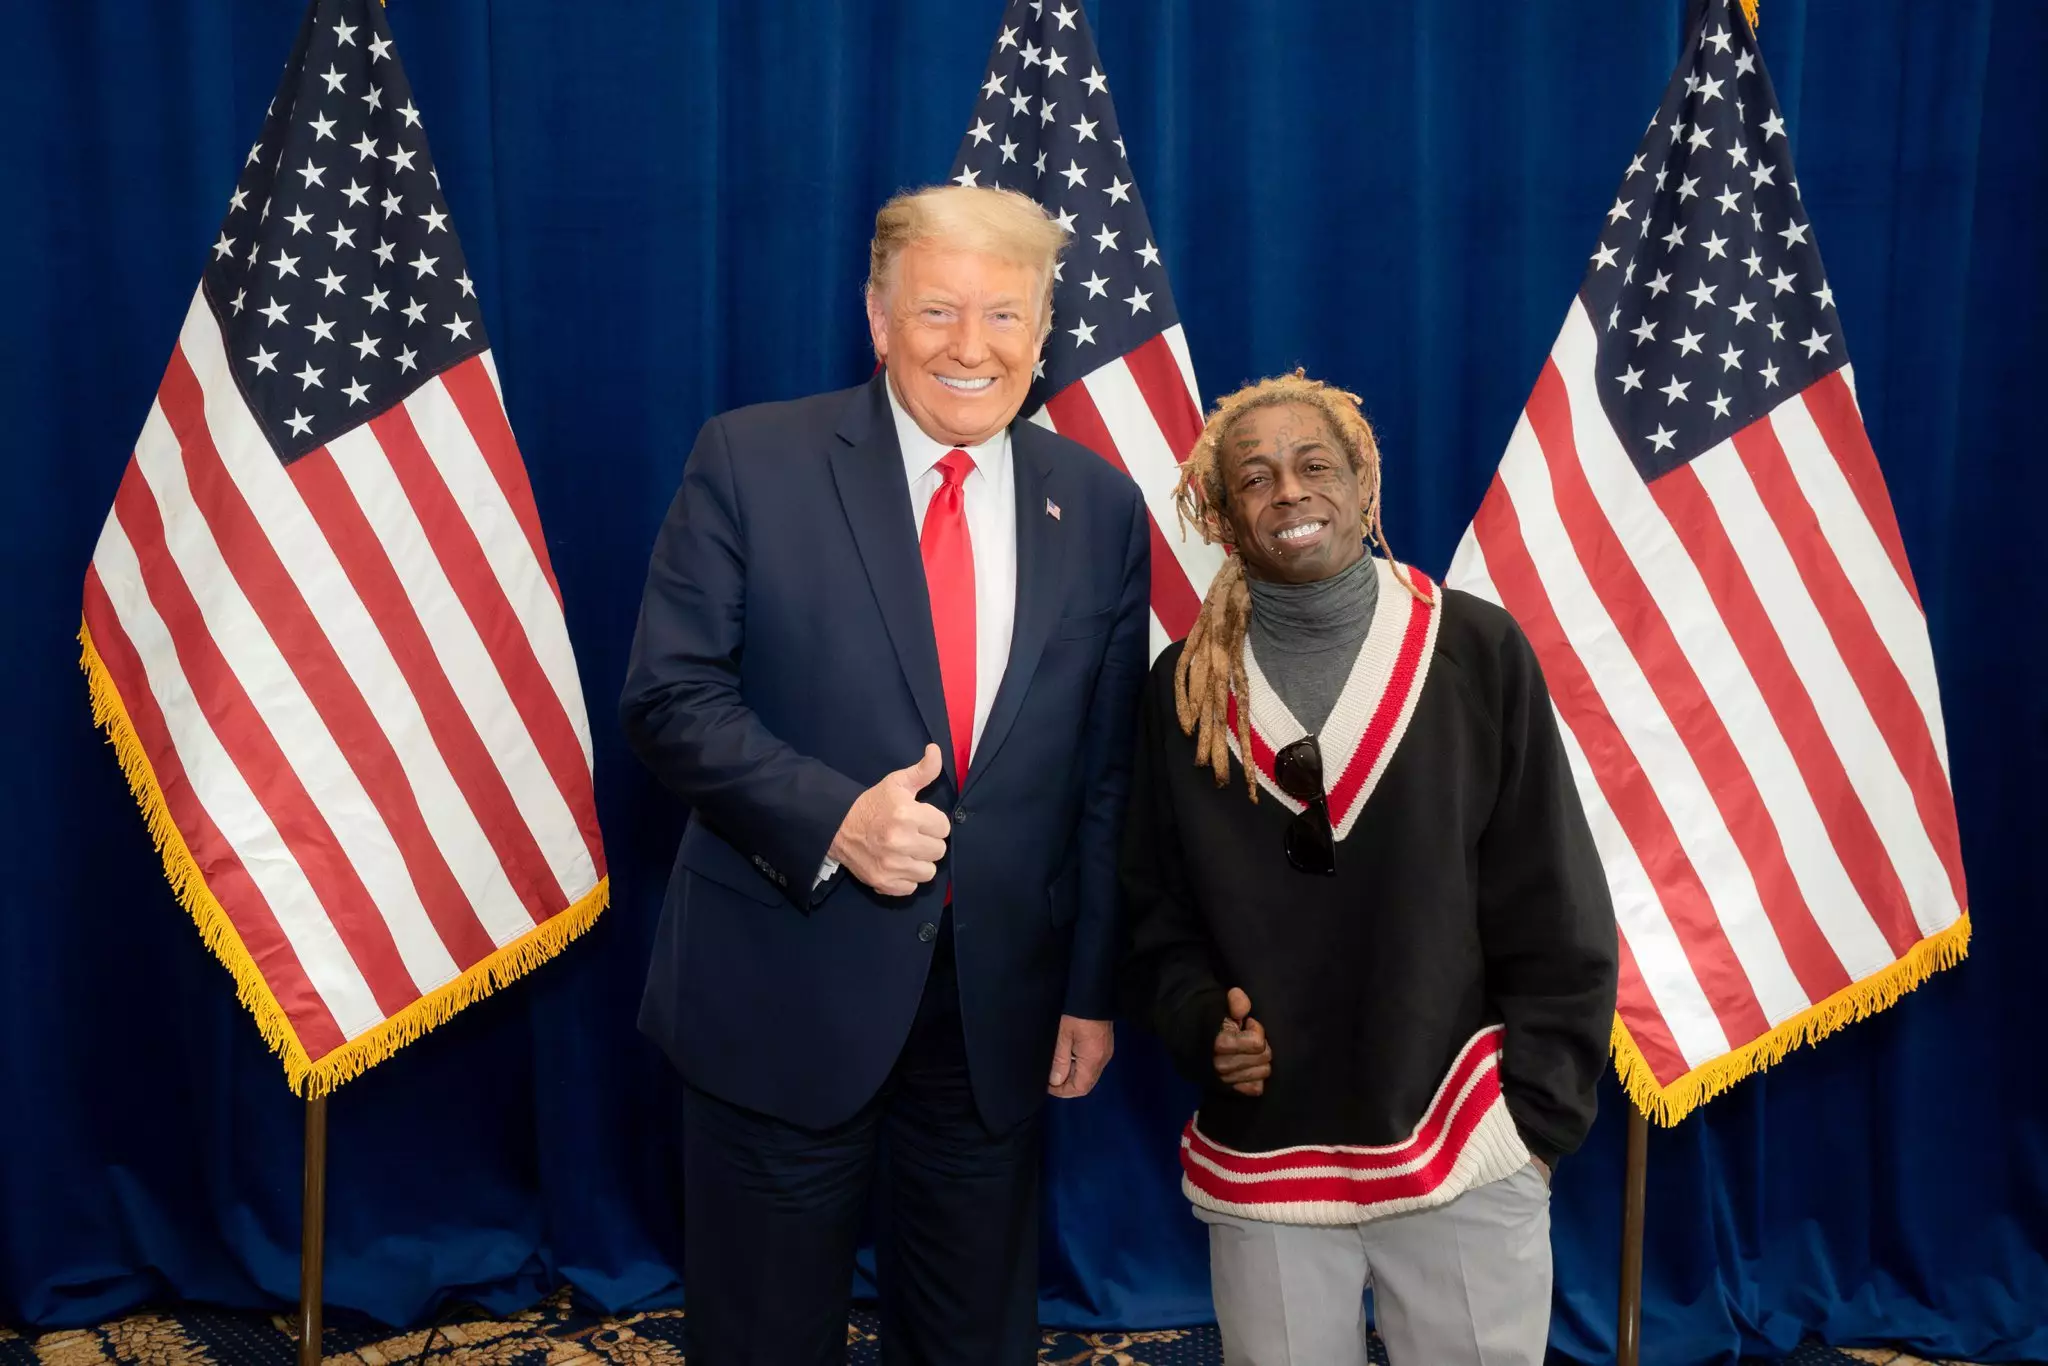 Lil Wayne tweeted a picture of himself with Donald Trump prior to the November election.